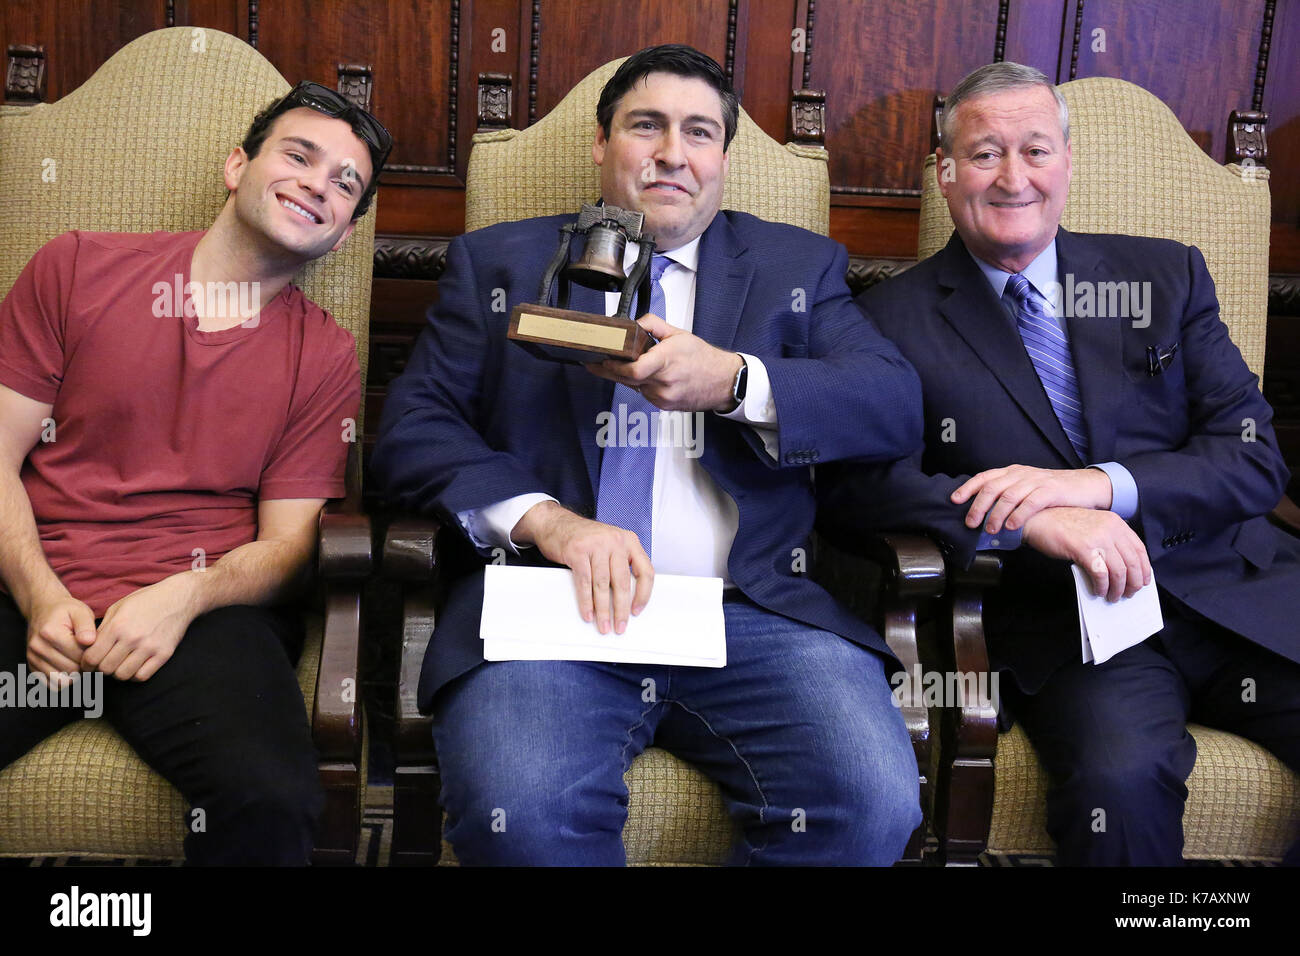 Pjiladelphia, PA, USA. 15th Sep, 2017. Actor Troy Gentile, who plays Barry Goldberg and producer Adam F Goldberg receive Liberty Bell from Philadelphia Mayor Jim Kenney for the Goldbergs in City Hall in Philadelphia, Pa on September 15, 2017 Credit: Star Shooter/Media Punch/Alamy Live News Stock Photo